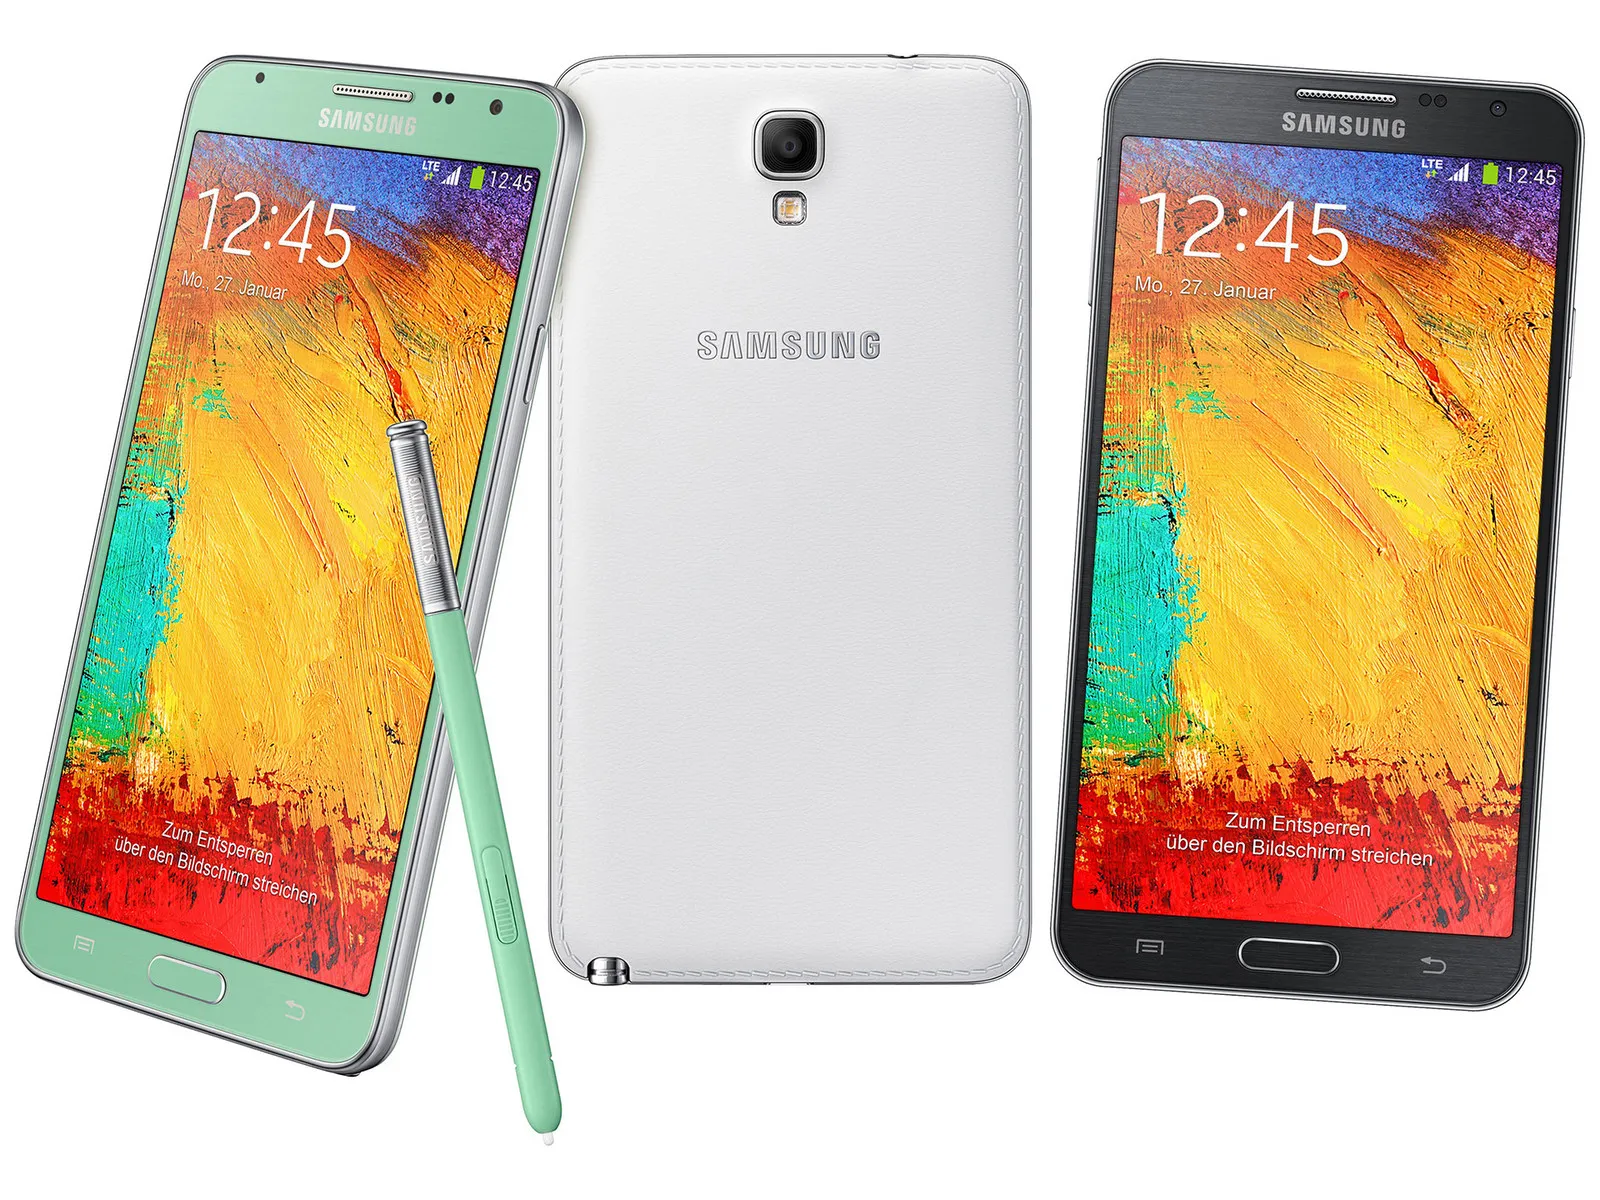 [Troubleshooting Guide] What to do if your Samsung Galaxy Note 3 Neo Duos continues rebooting on its own after the rooting method